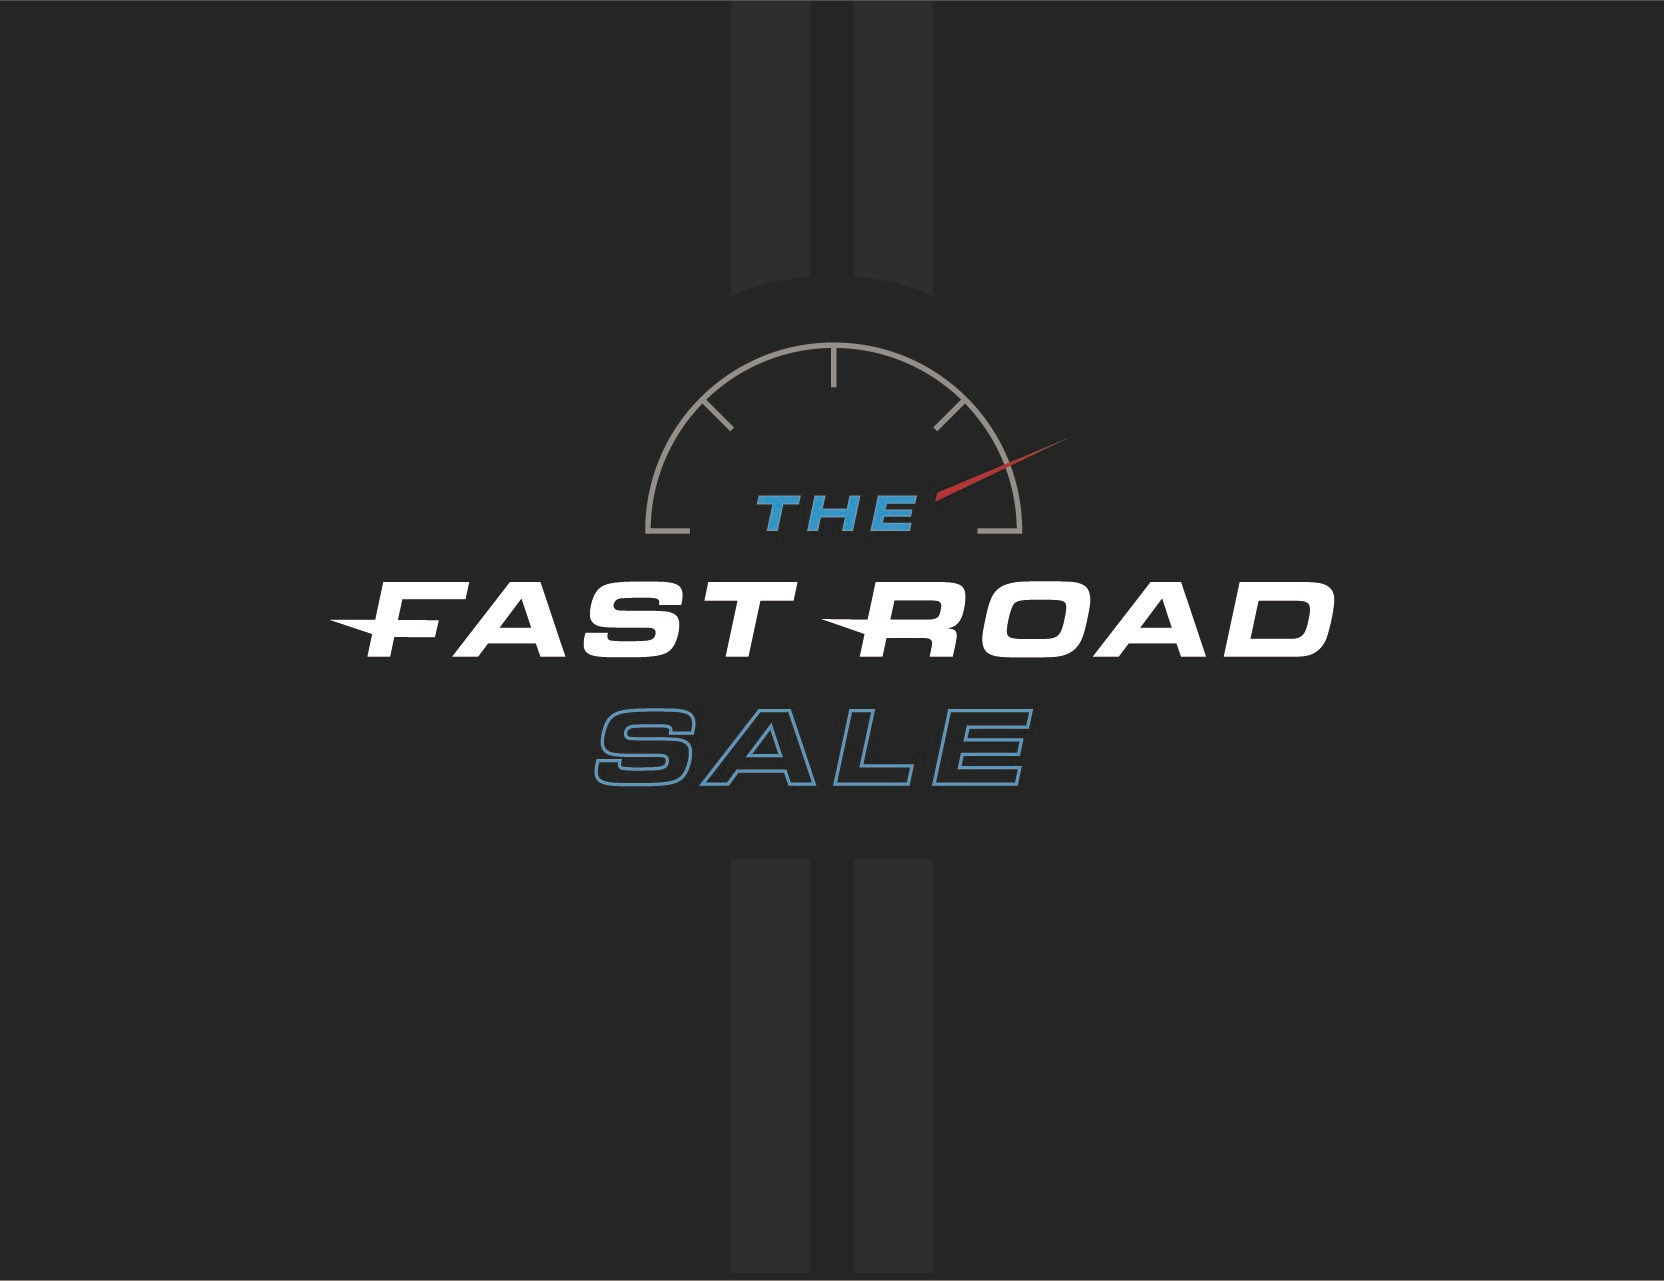 The Fast Road Sale @ Imperial War Museum, Duxford